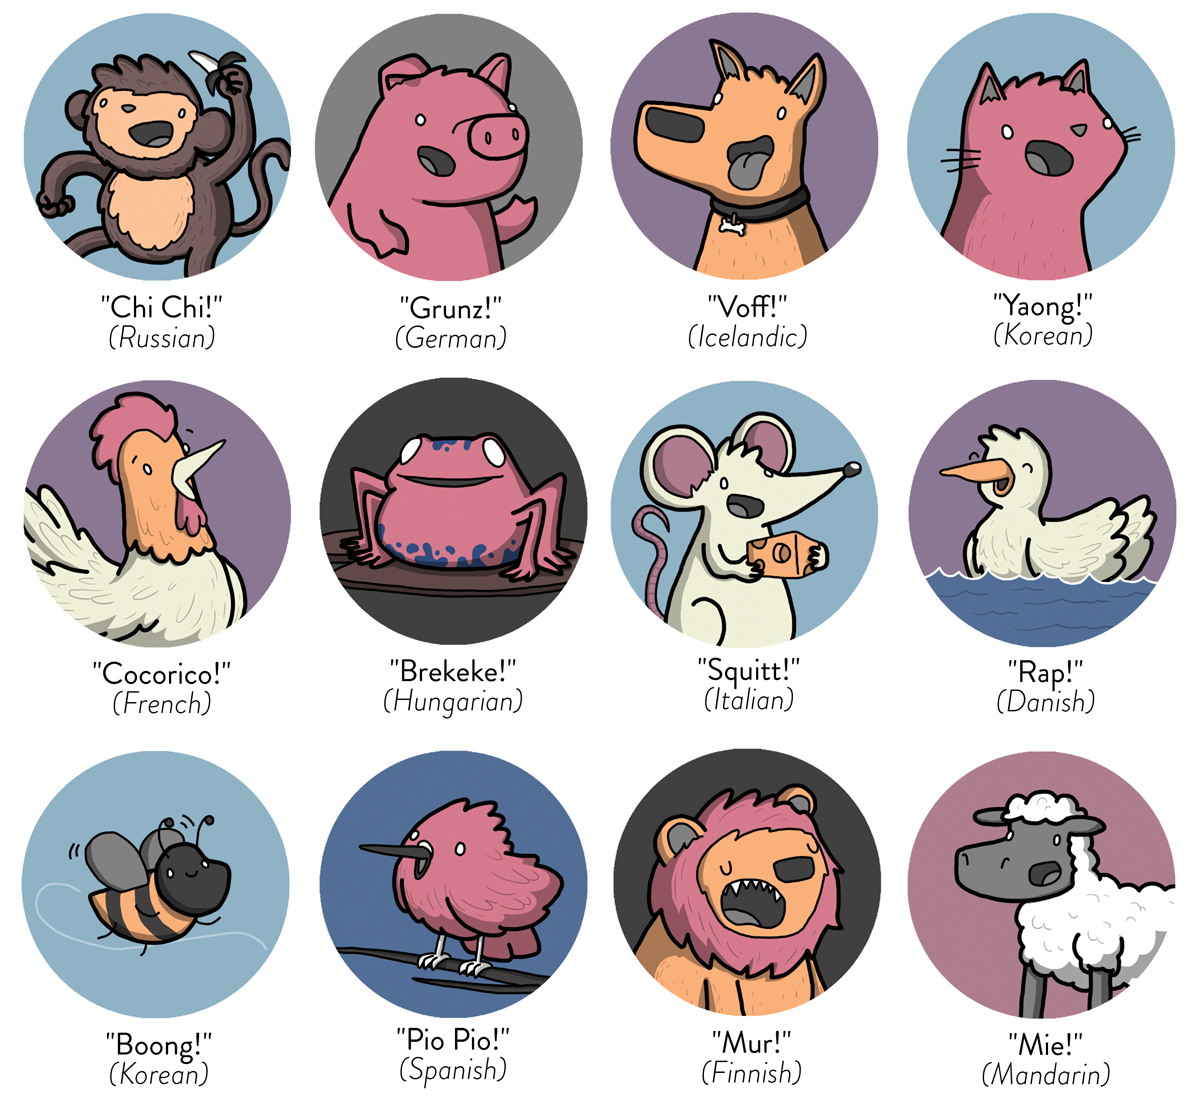 JAMES CHAPMAN DRAWS — Google does animal sounds now! But don't forget...